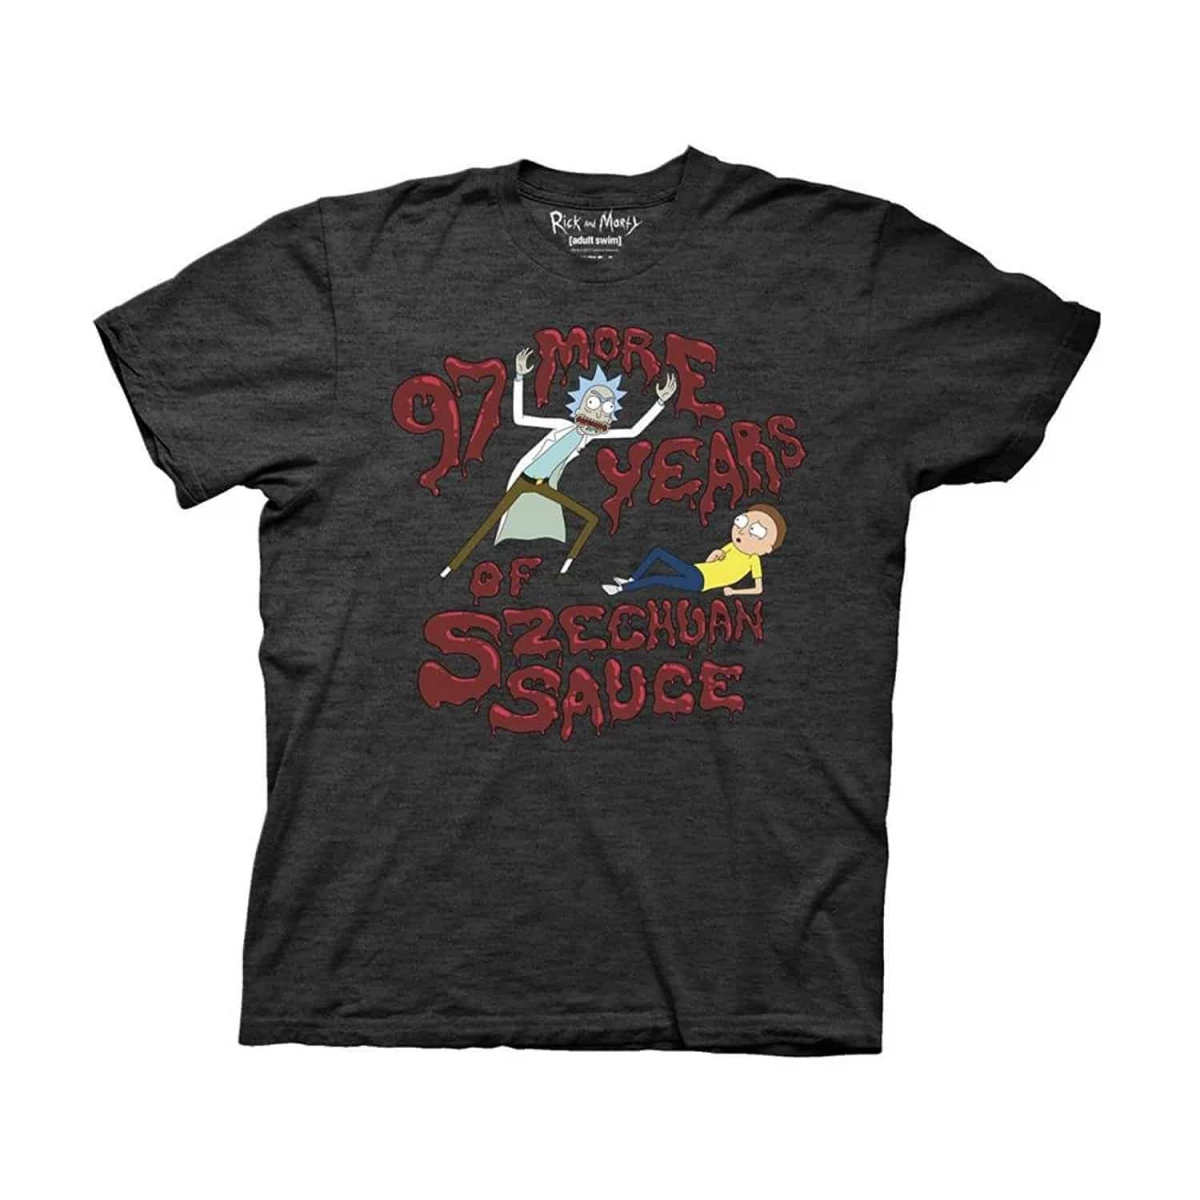 Rick and Morty 97 More Years Of Szechuan Sauce Crew T-Shirt